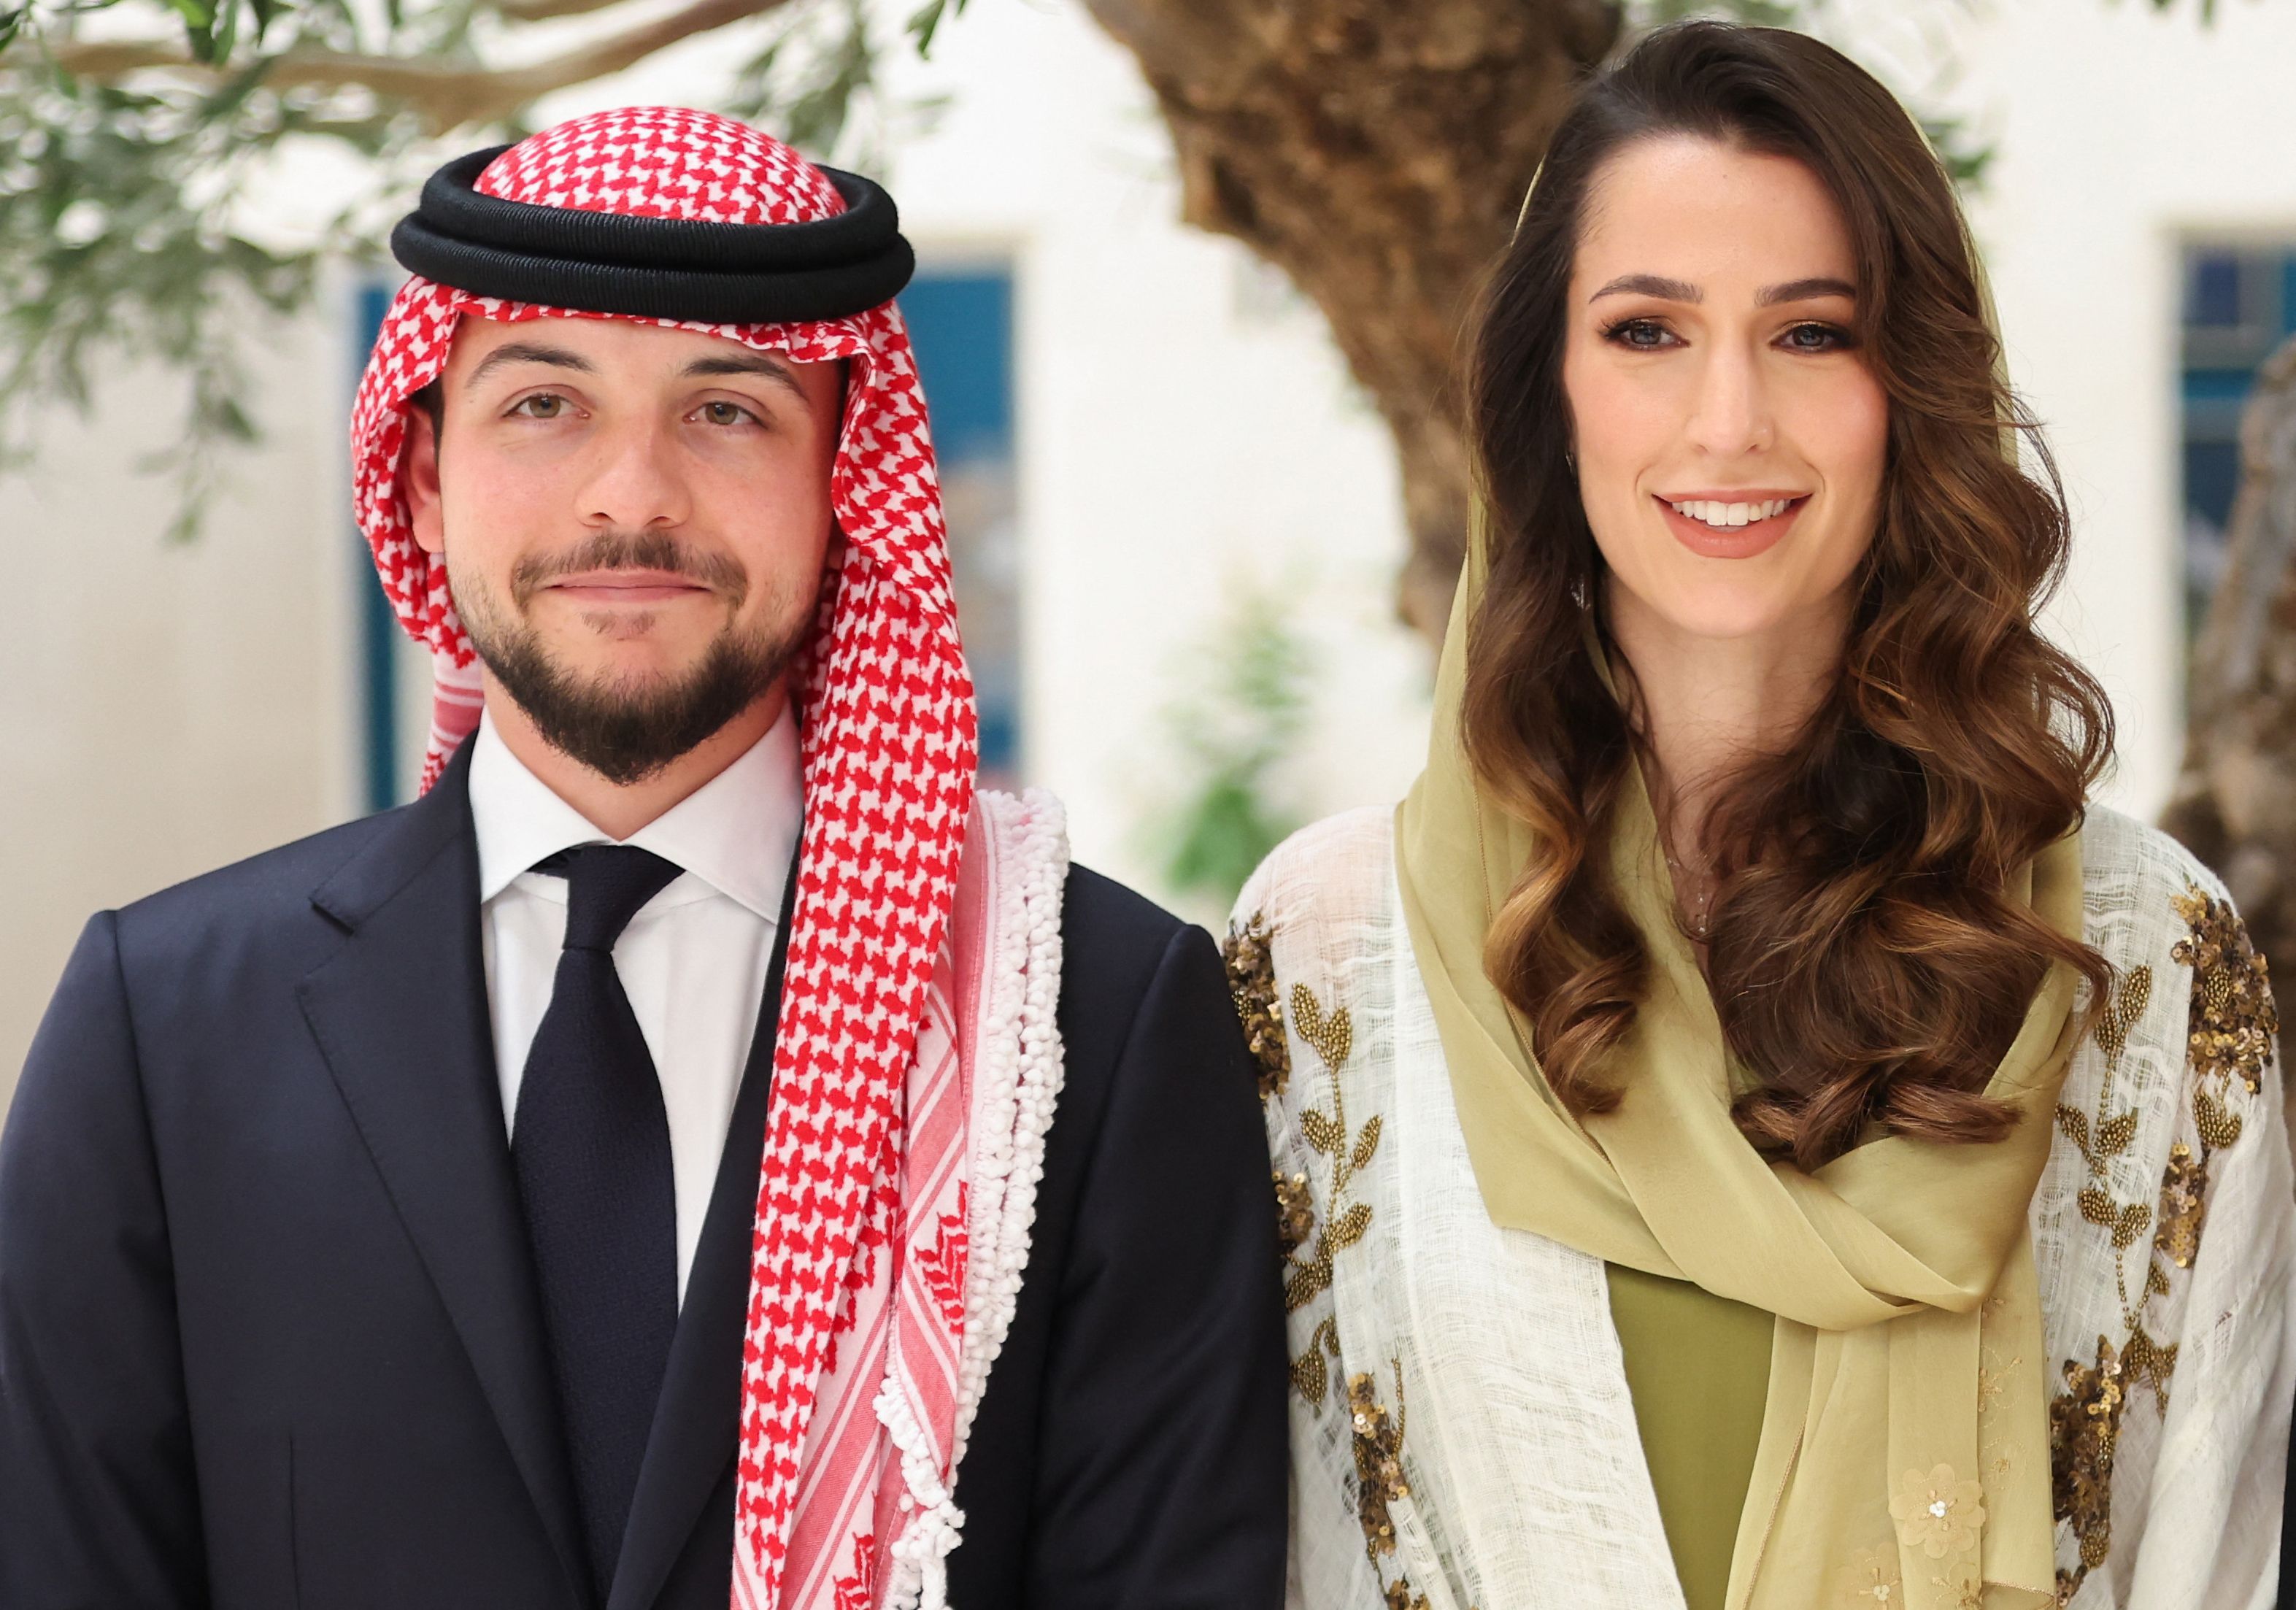 Intercambiar zoo Contable Five things to know about Jordan's Crown Prince Hussein after his engagement